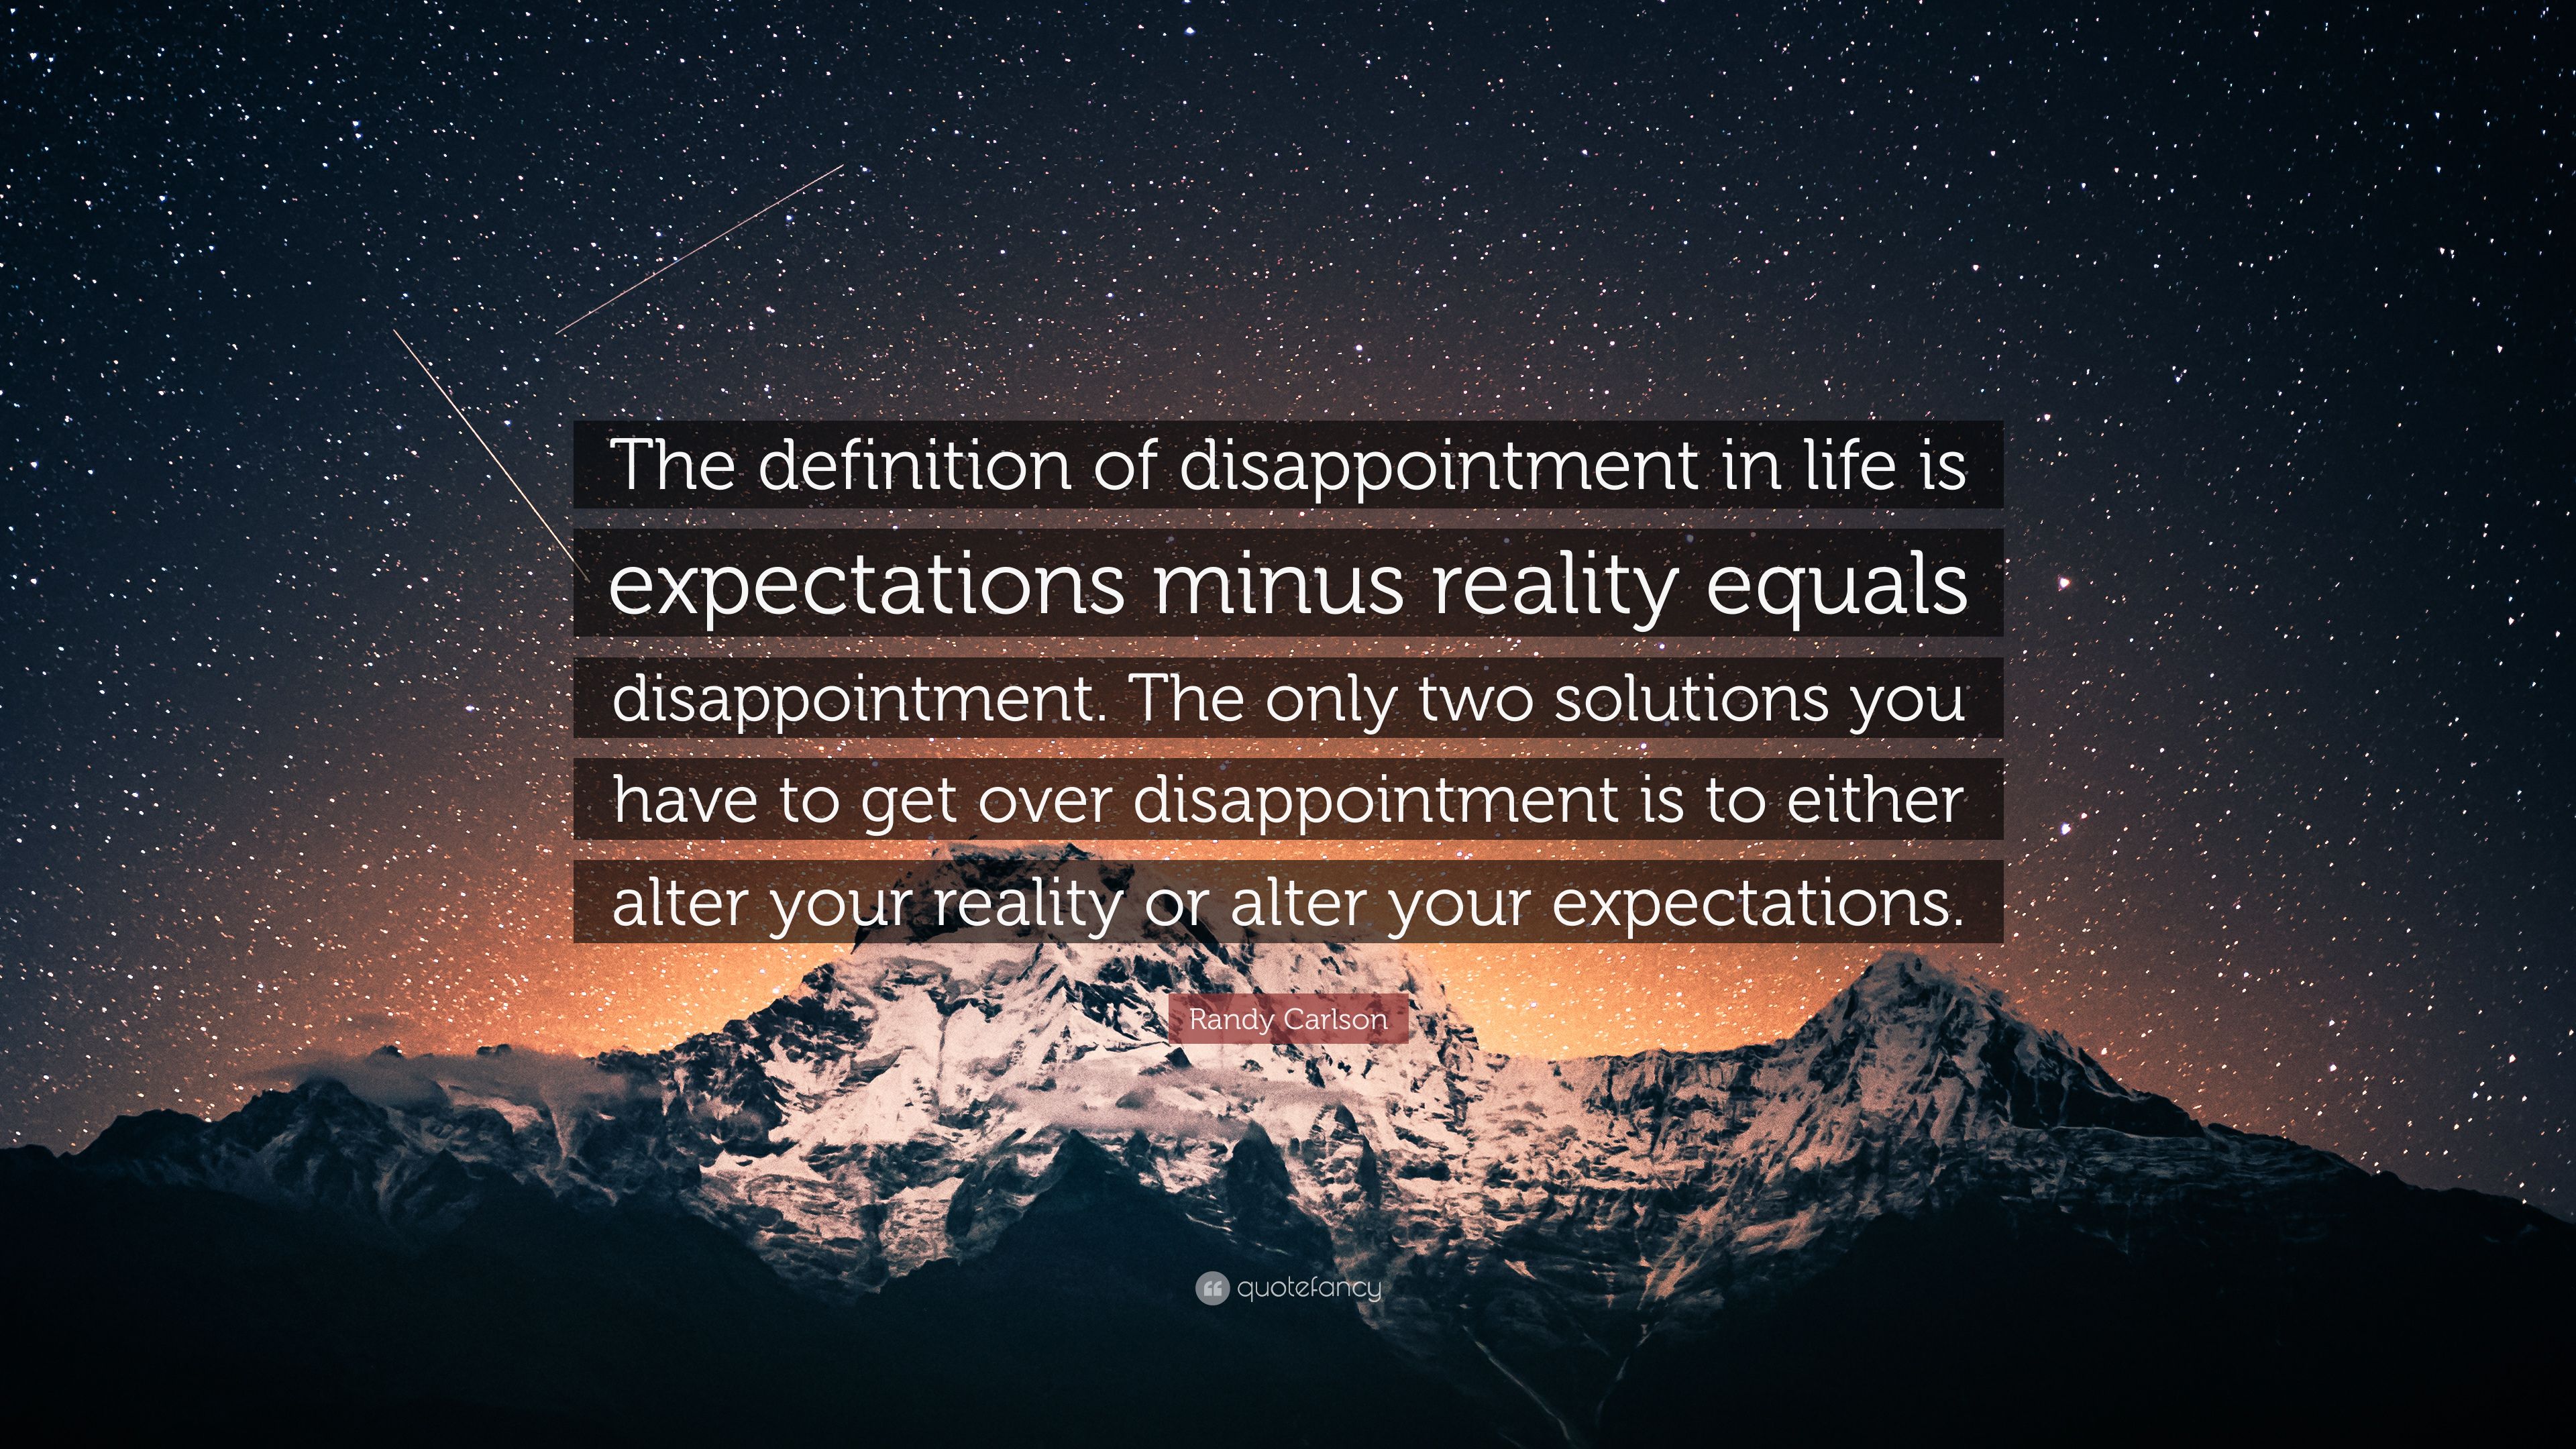 Randy Carlson Quote: “The definition of disappointment in life is expectations minus reality equals disappointment. The only two solutions you.” (7 wallpaper)